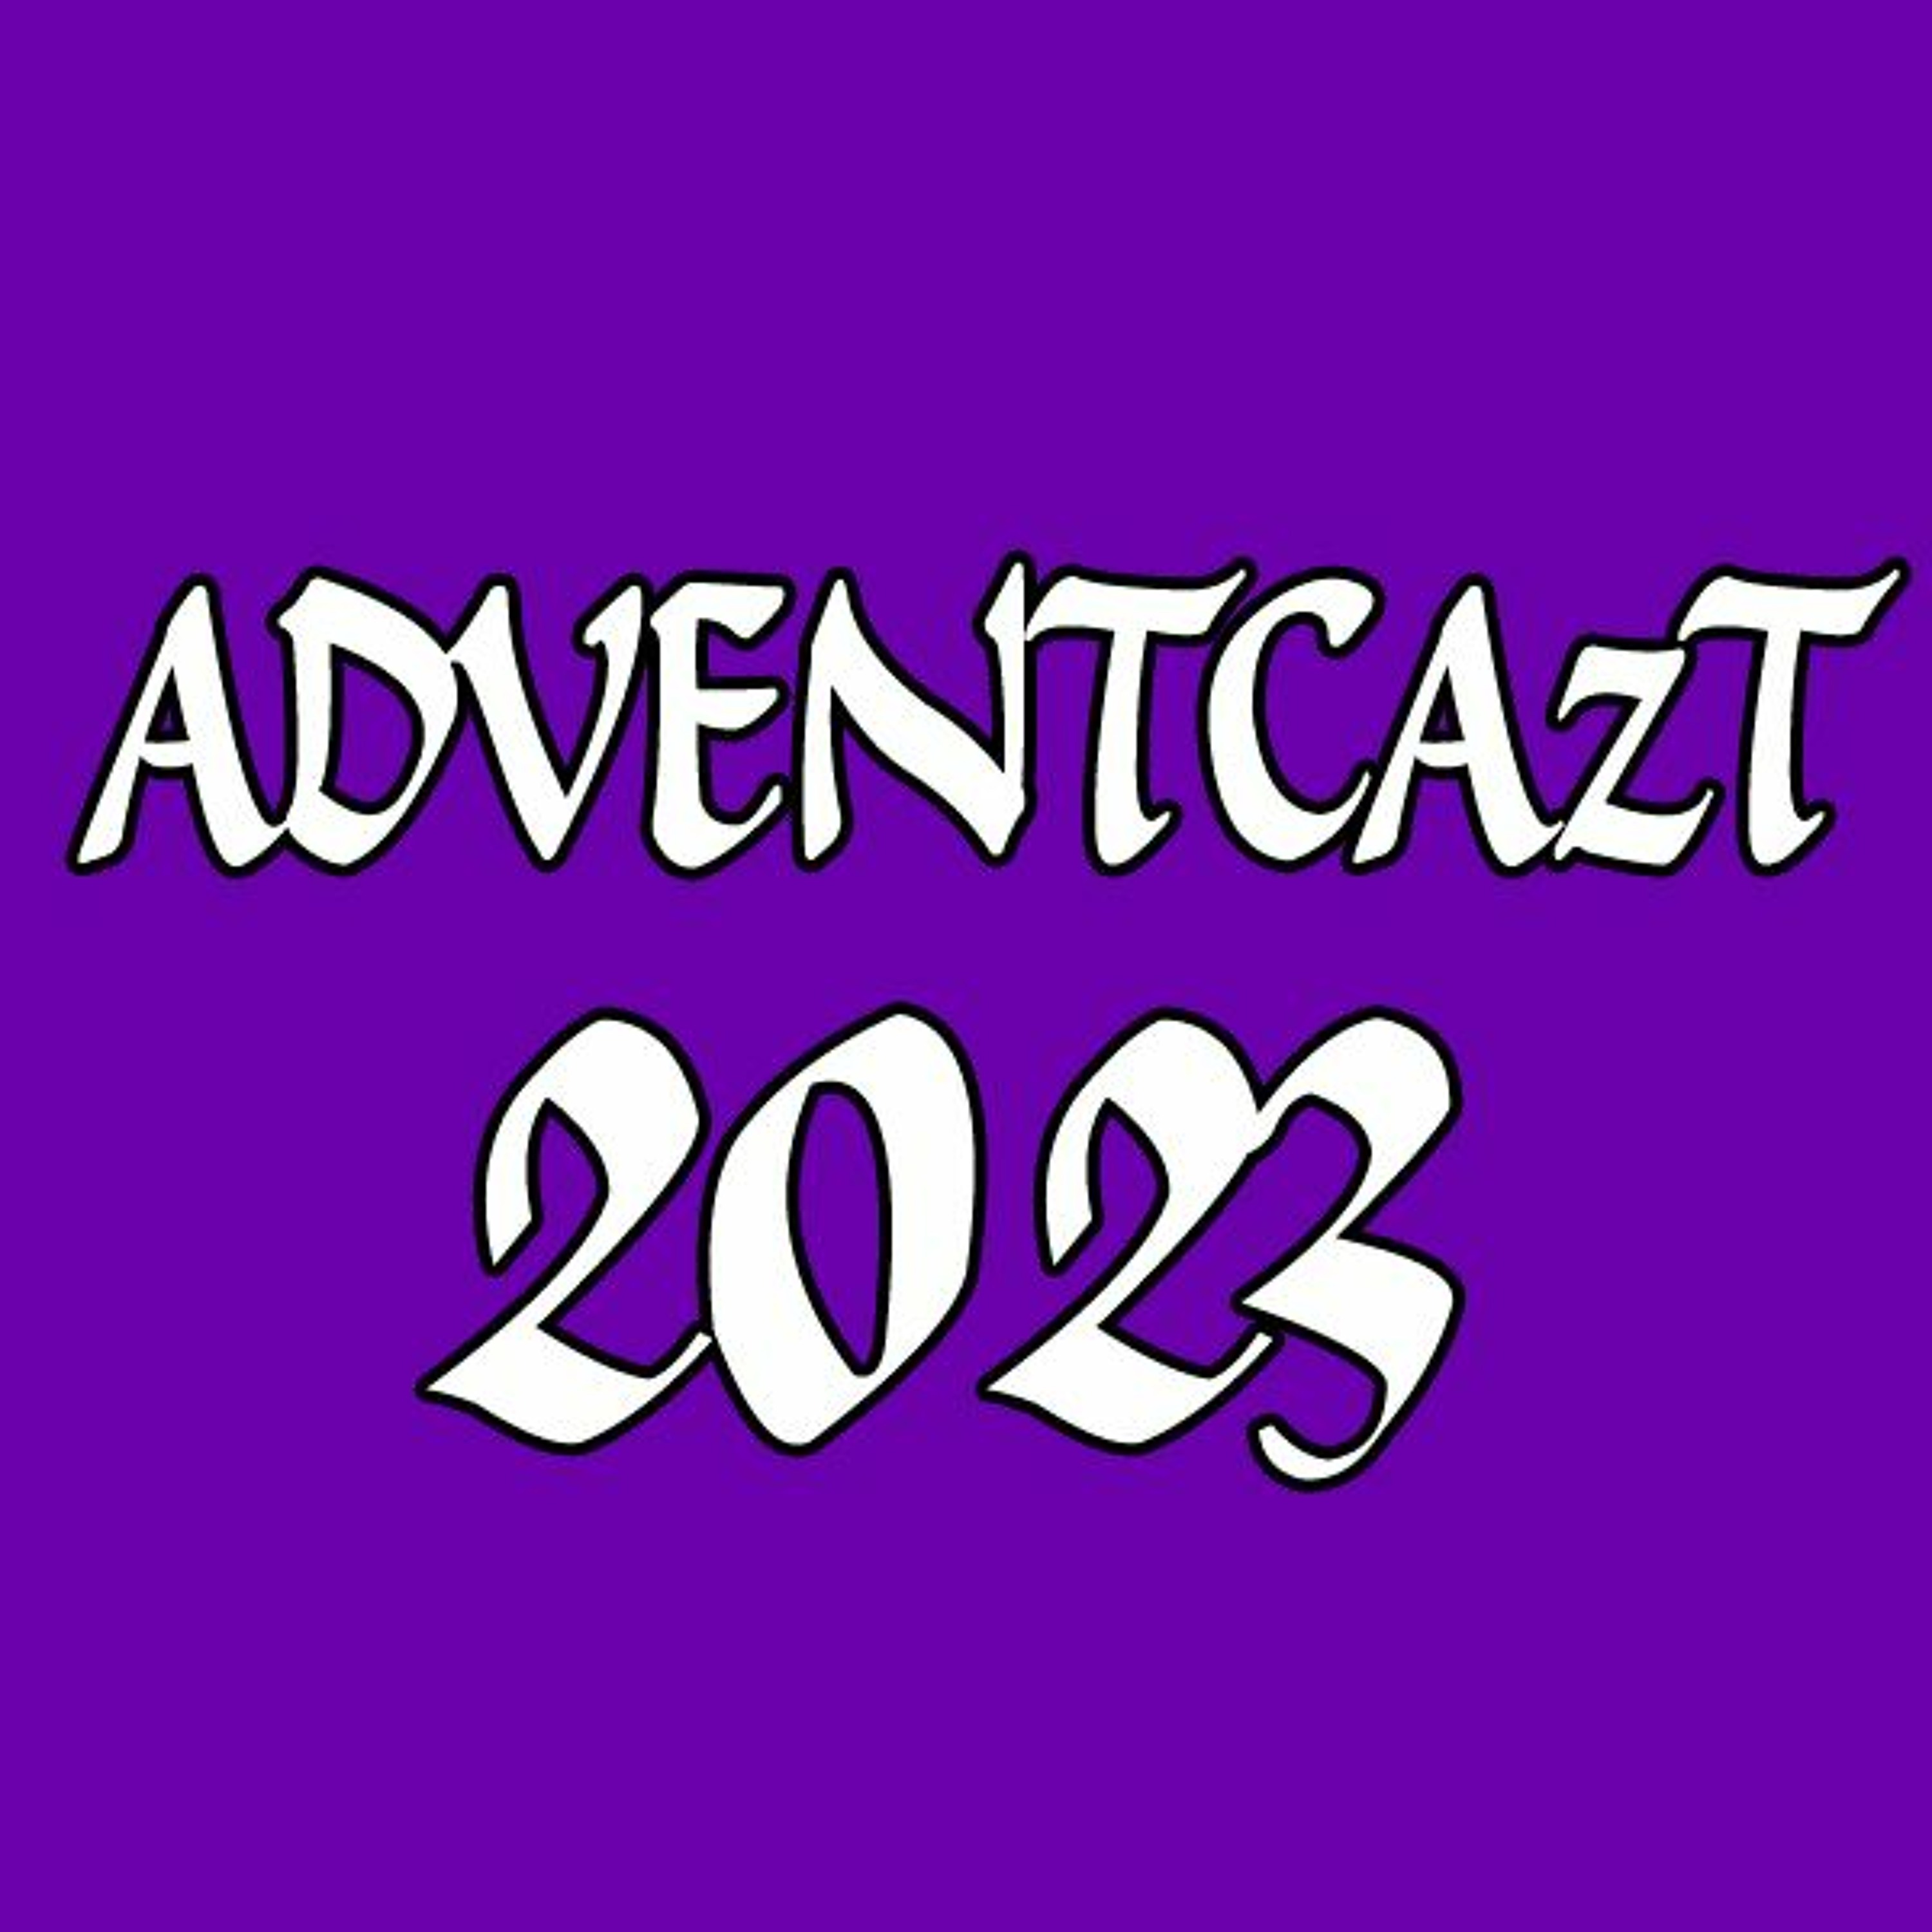 ADVENTCAzT 2023 – 17 – Tuesday 3rd Week of Advent: Physician of our souls